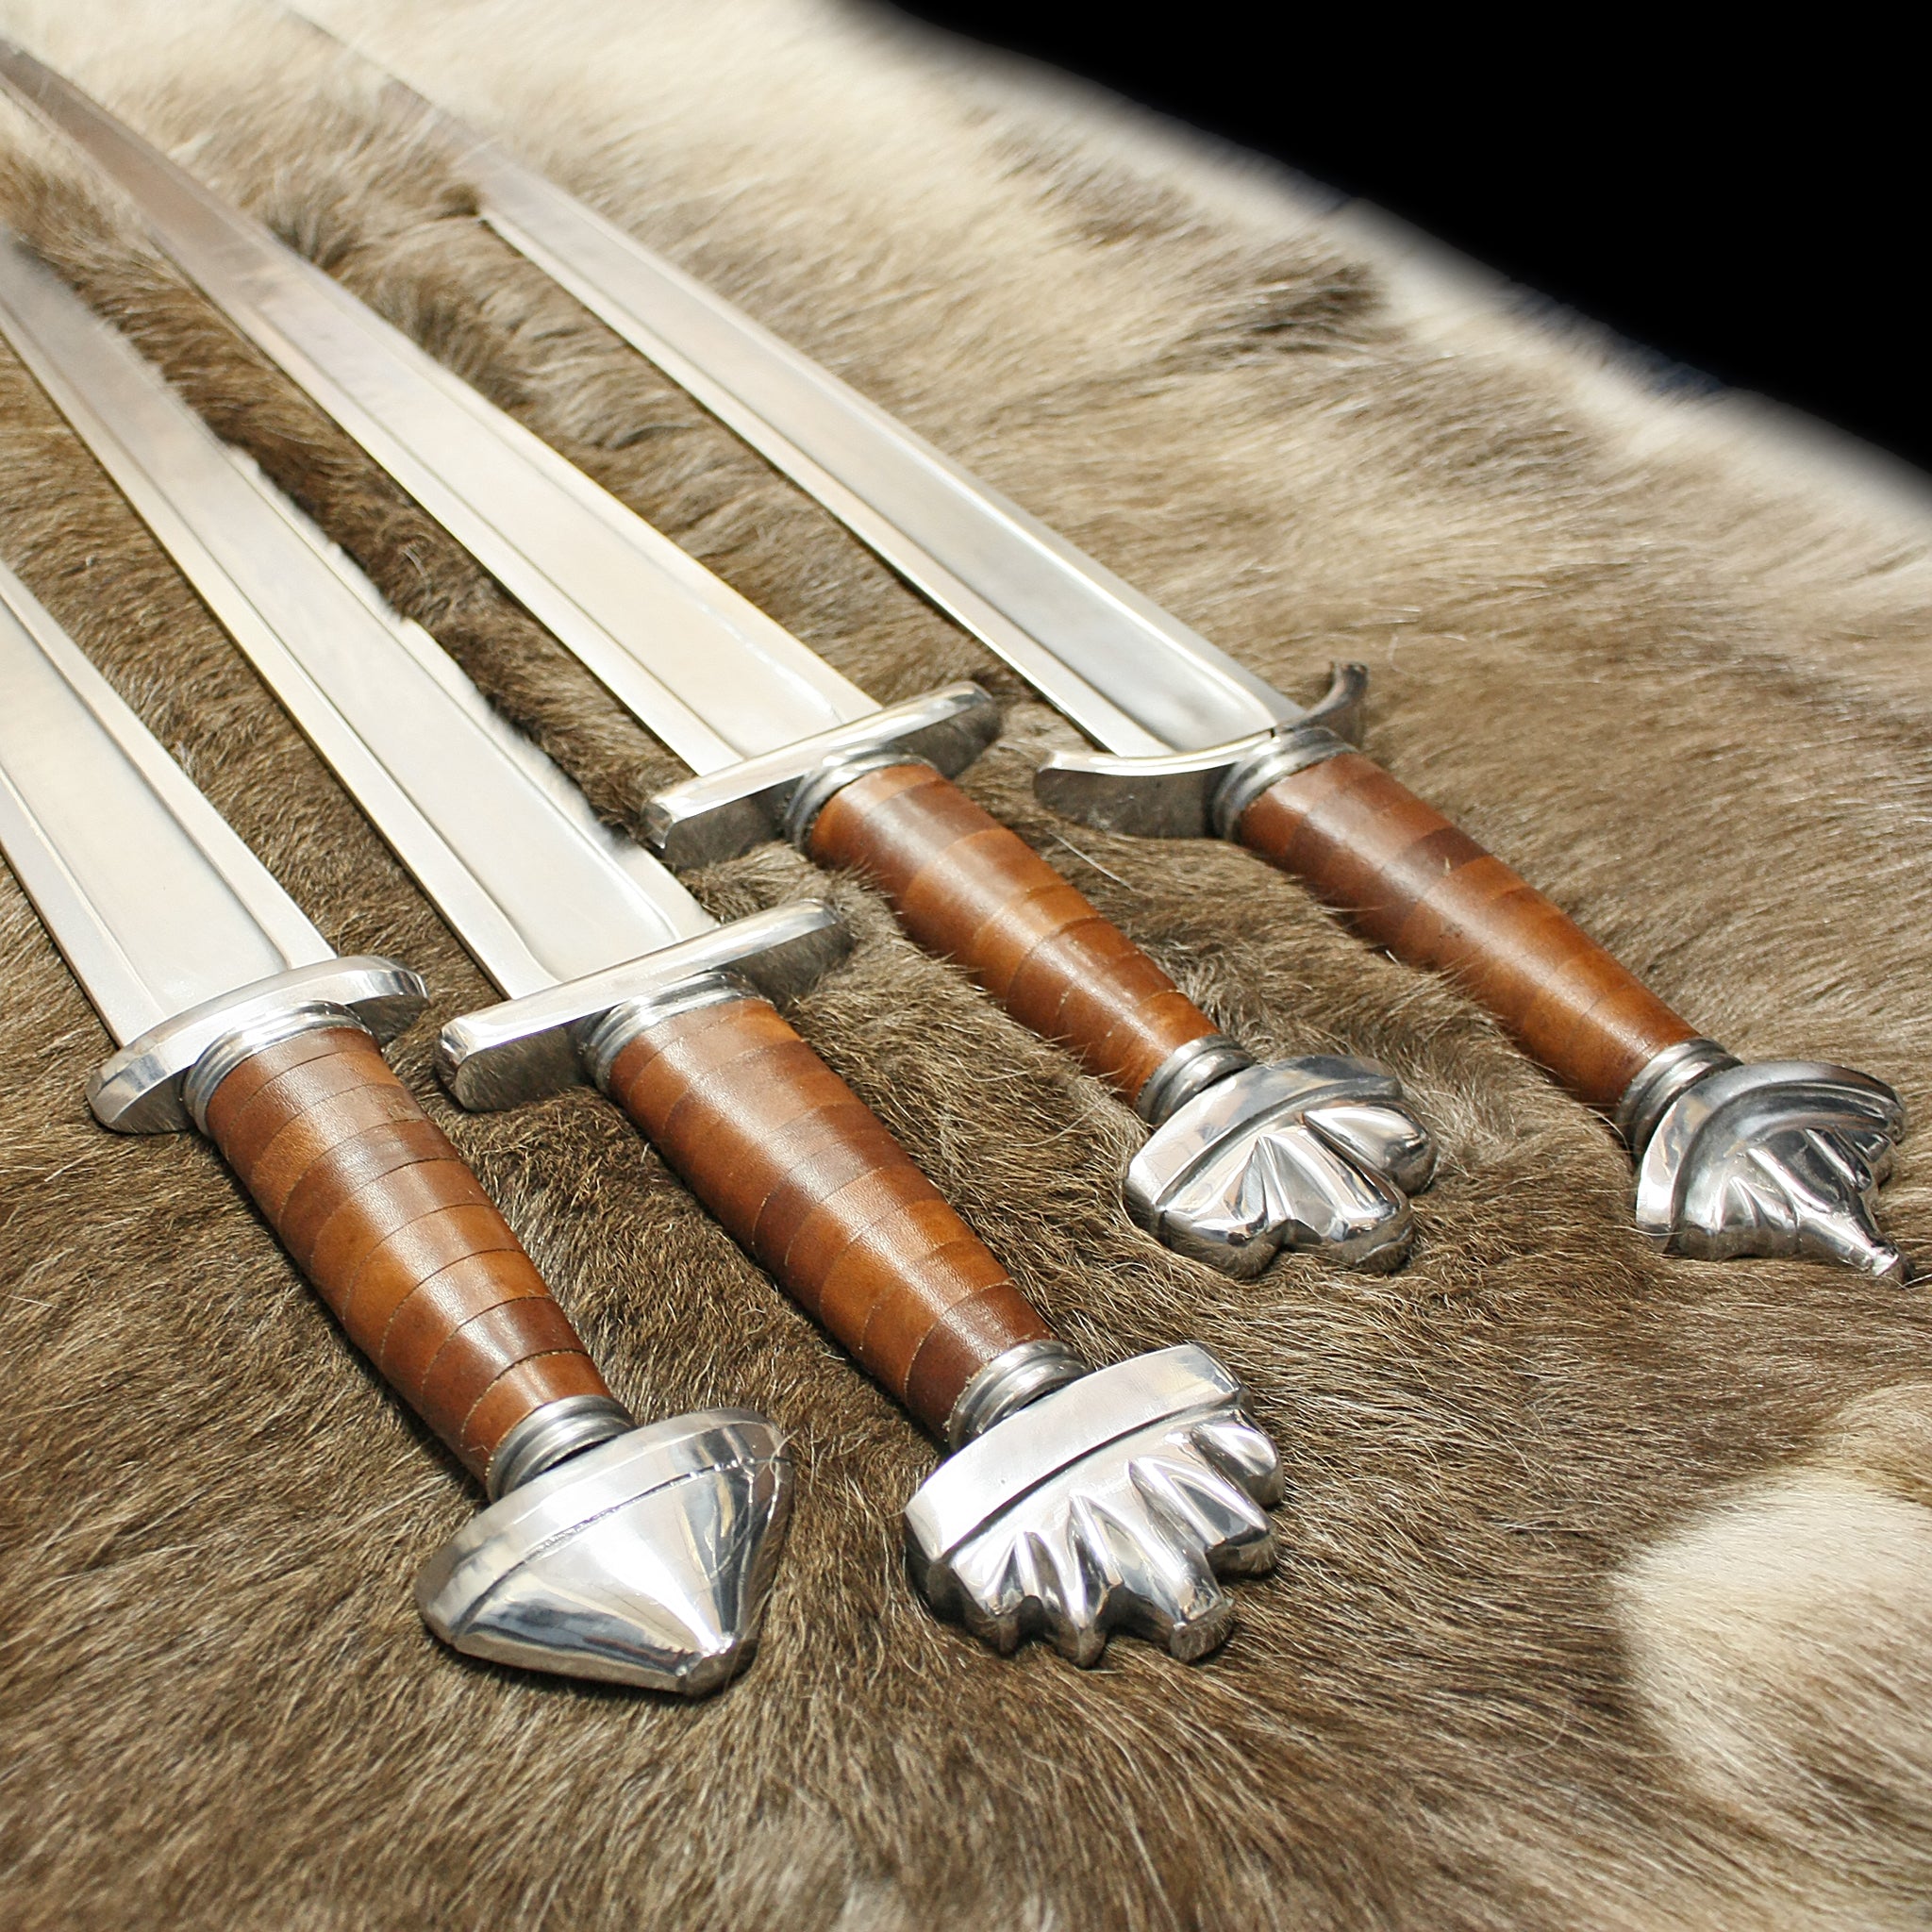 Battle-Ready Viking swords For Re-Enactment / Live Steel Use